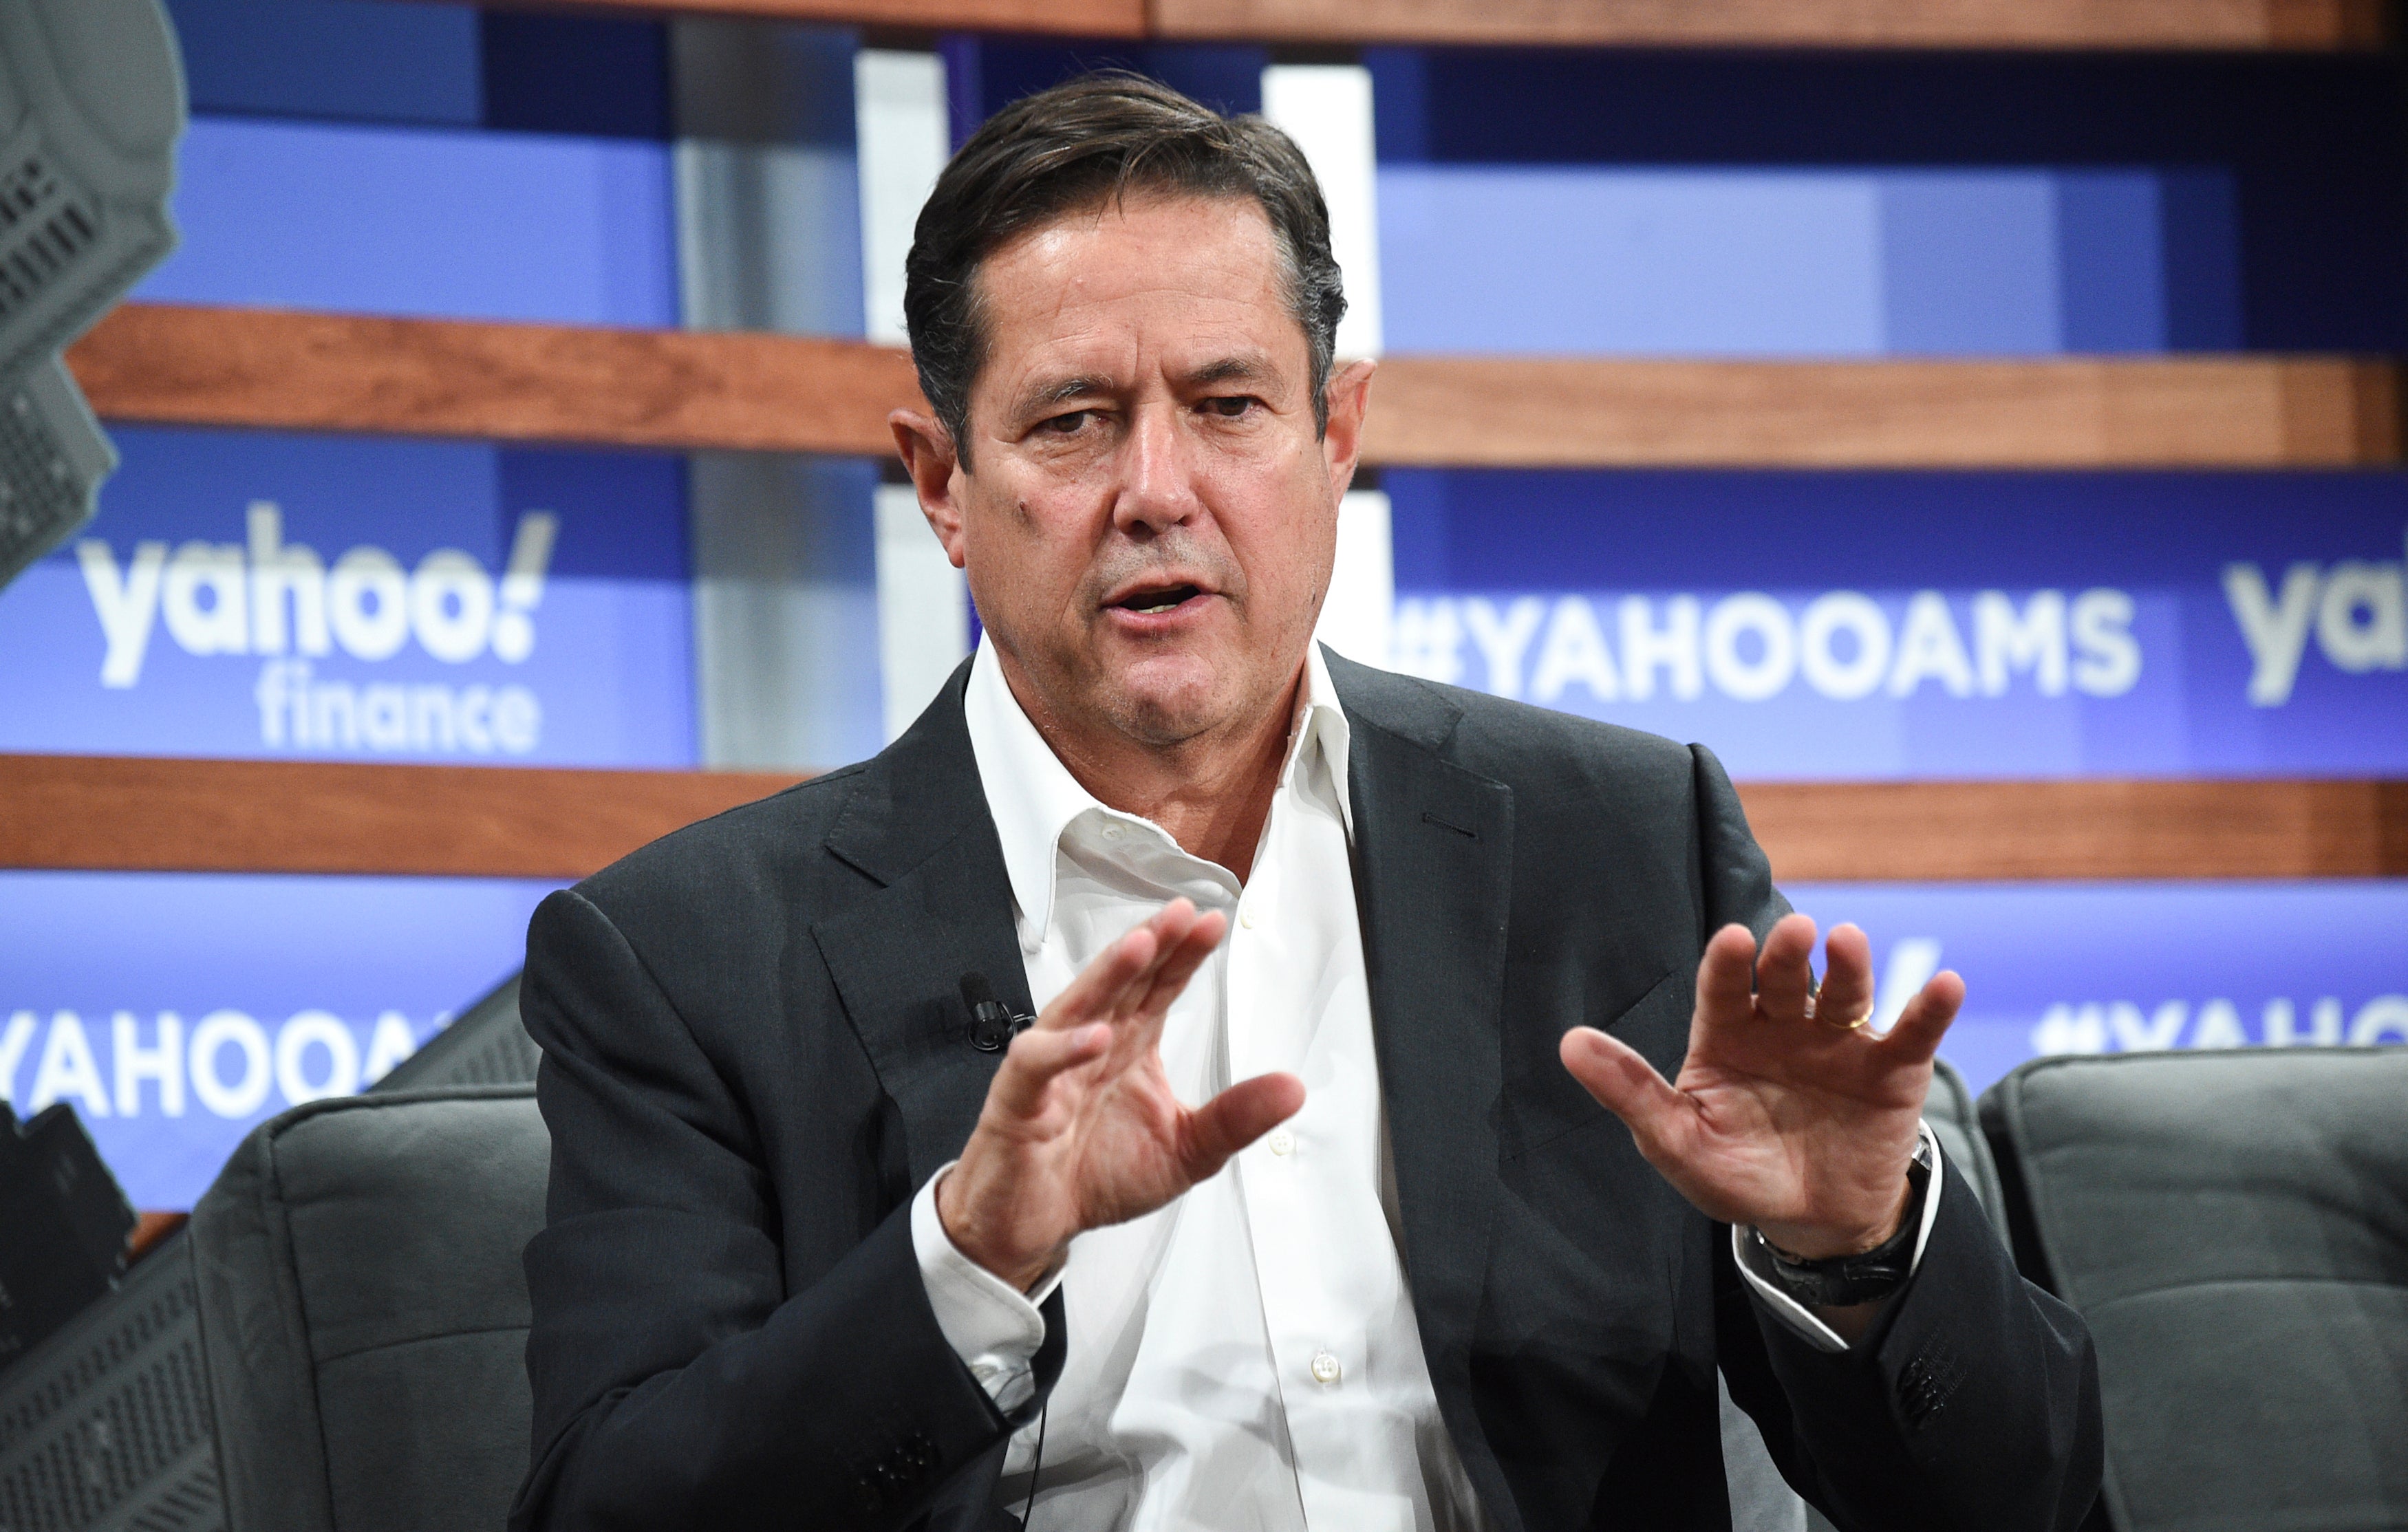 Former Barclays CEO Jes Staley has said he is being scapegoated by JPMorgan